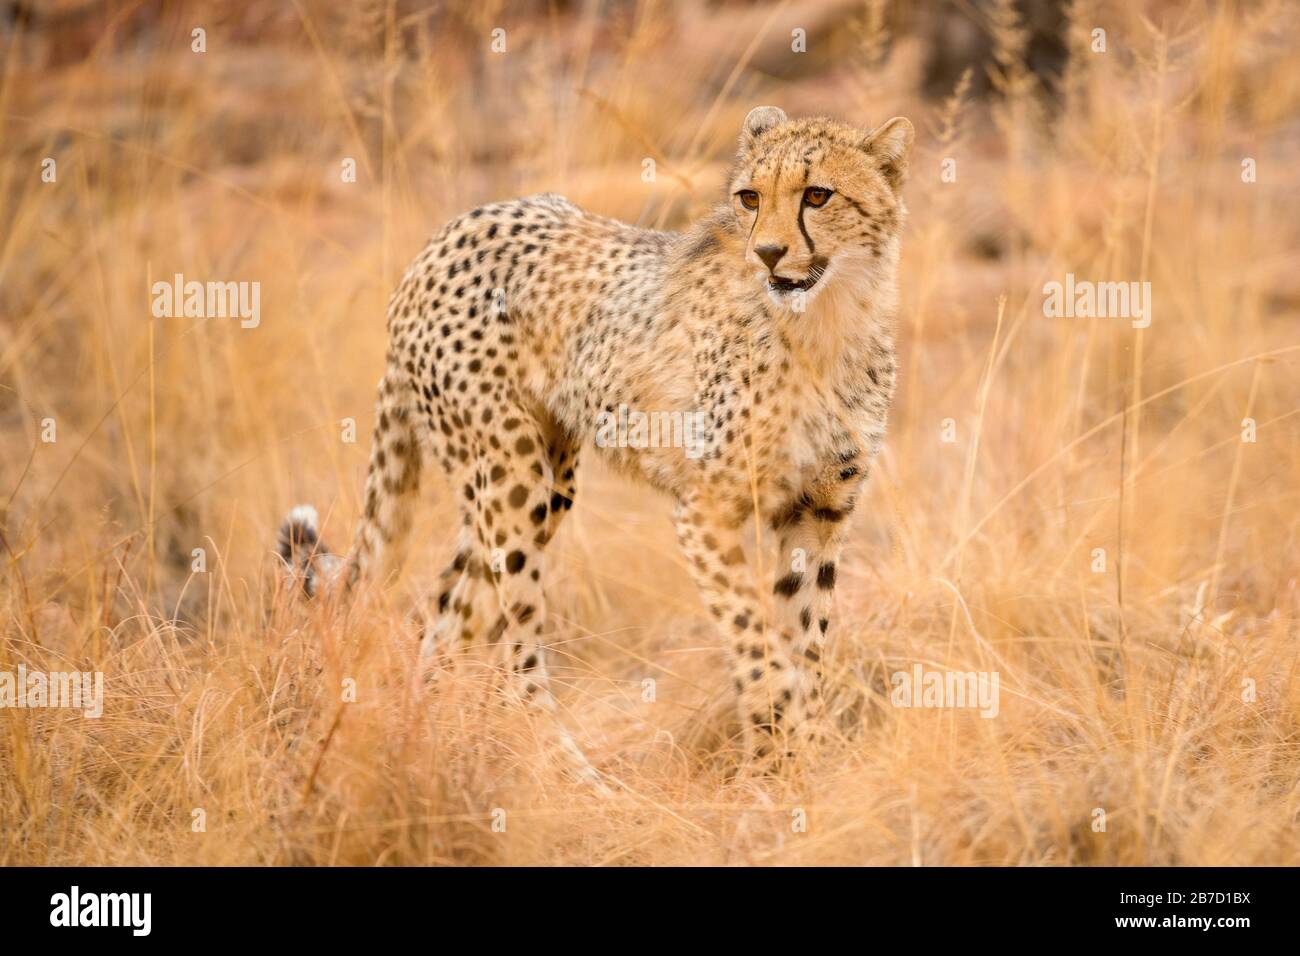 A close up photograph of a young, walking cheetah, taken in the Welgevonden Game Reserve in South Africa. Stock Photo